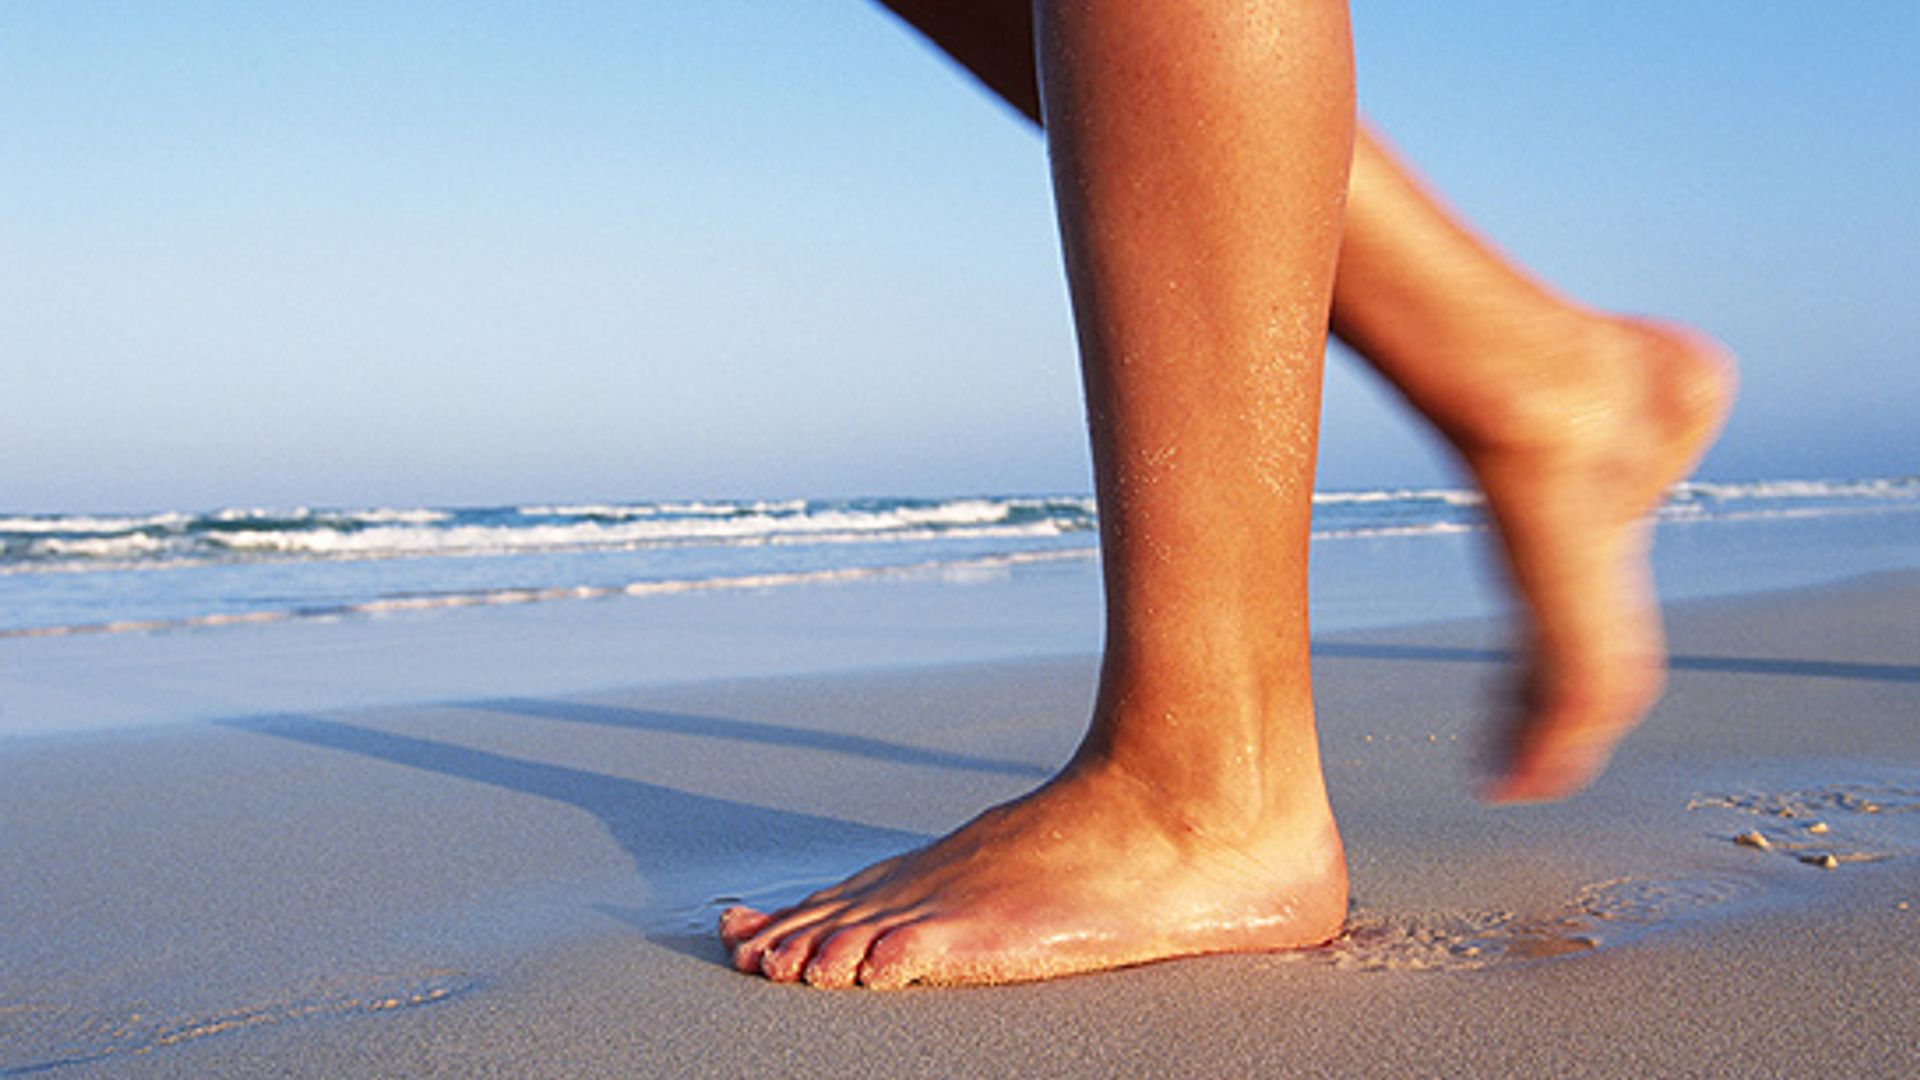 4 Health Benefits of Walking on the Beach - Tips for Walking on Sand